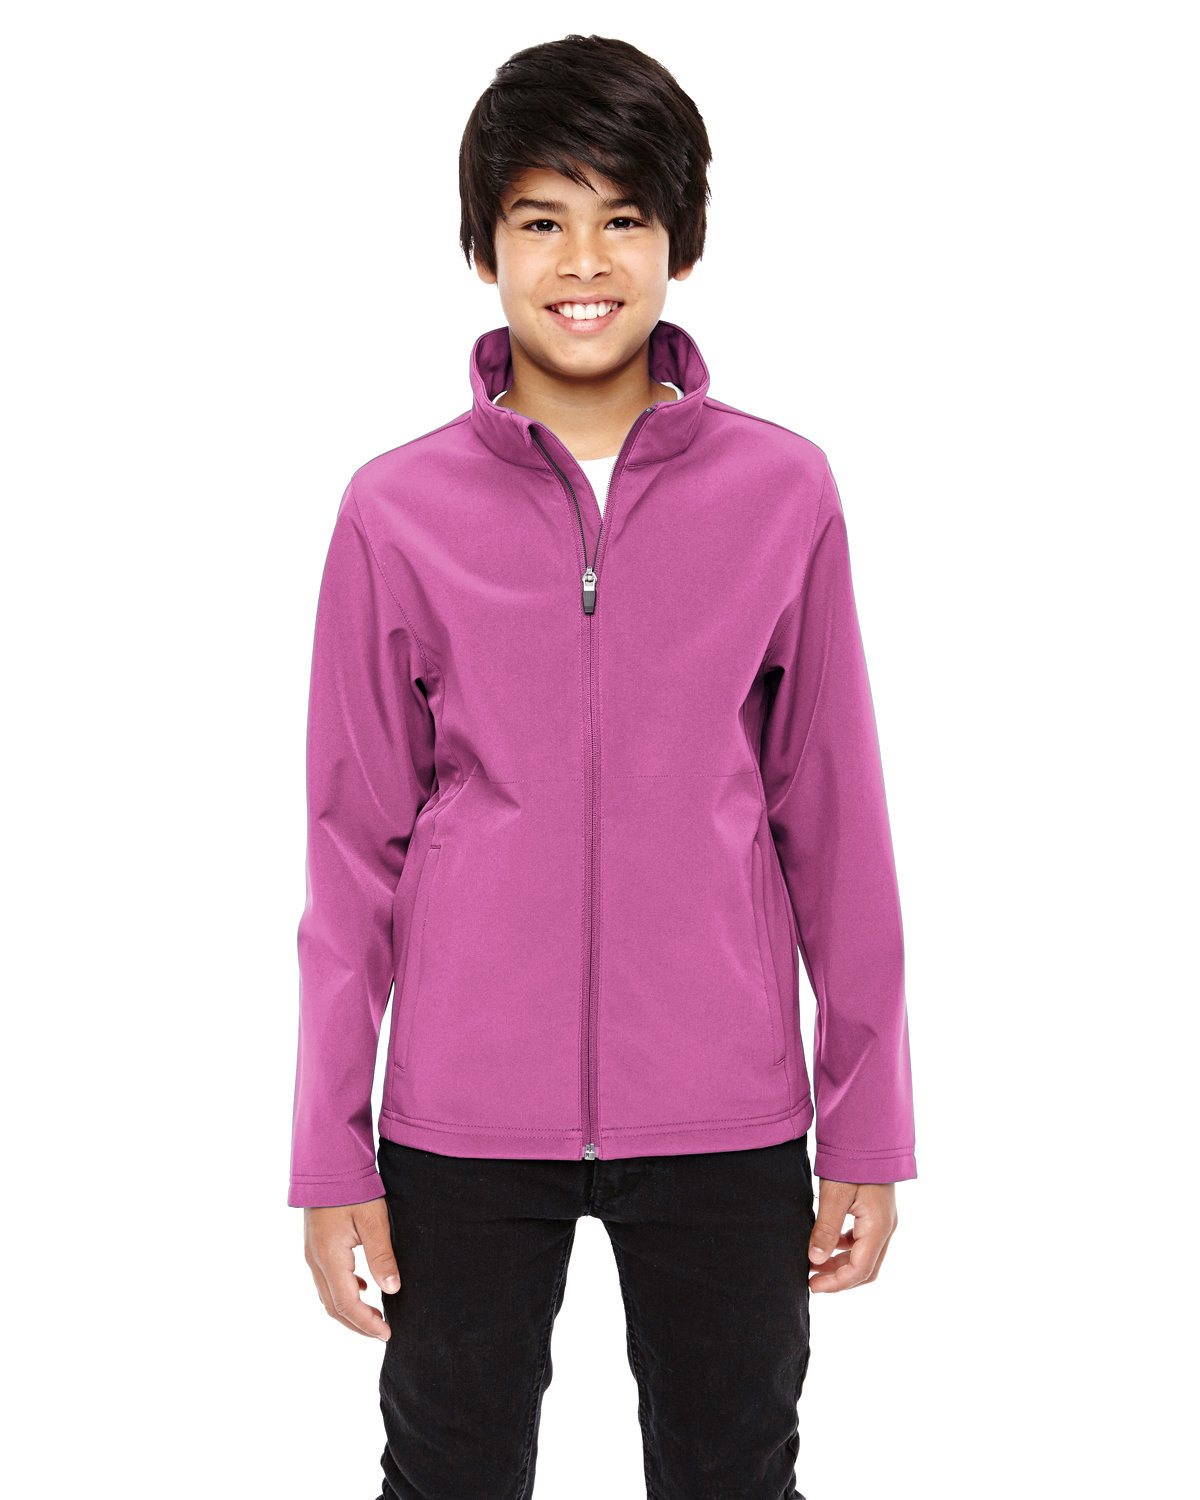 Team 365 Youth Leader Soft Shell Jacket SP CHARITY PINK 